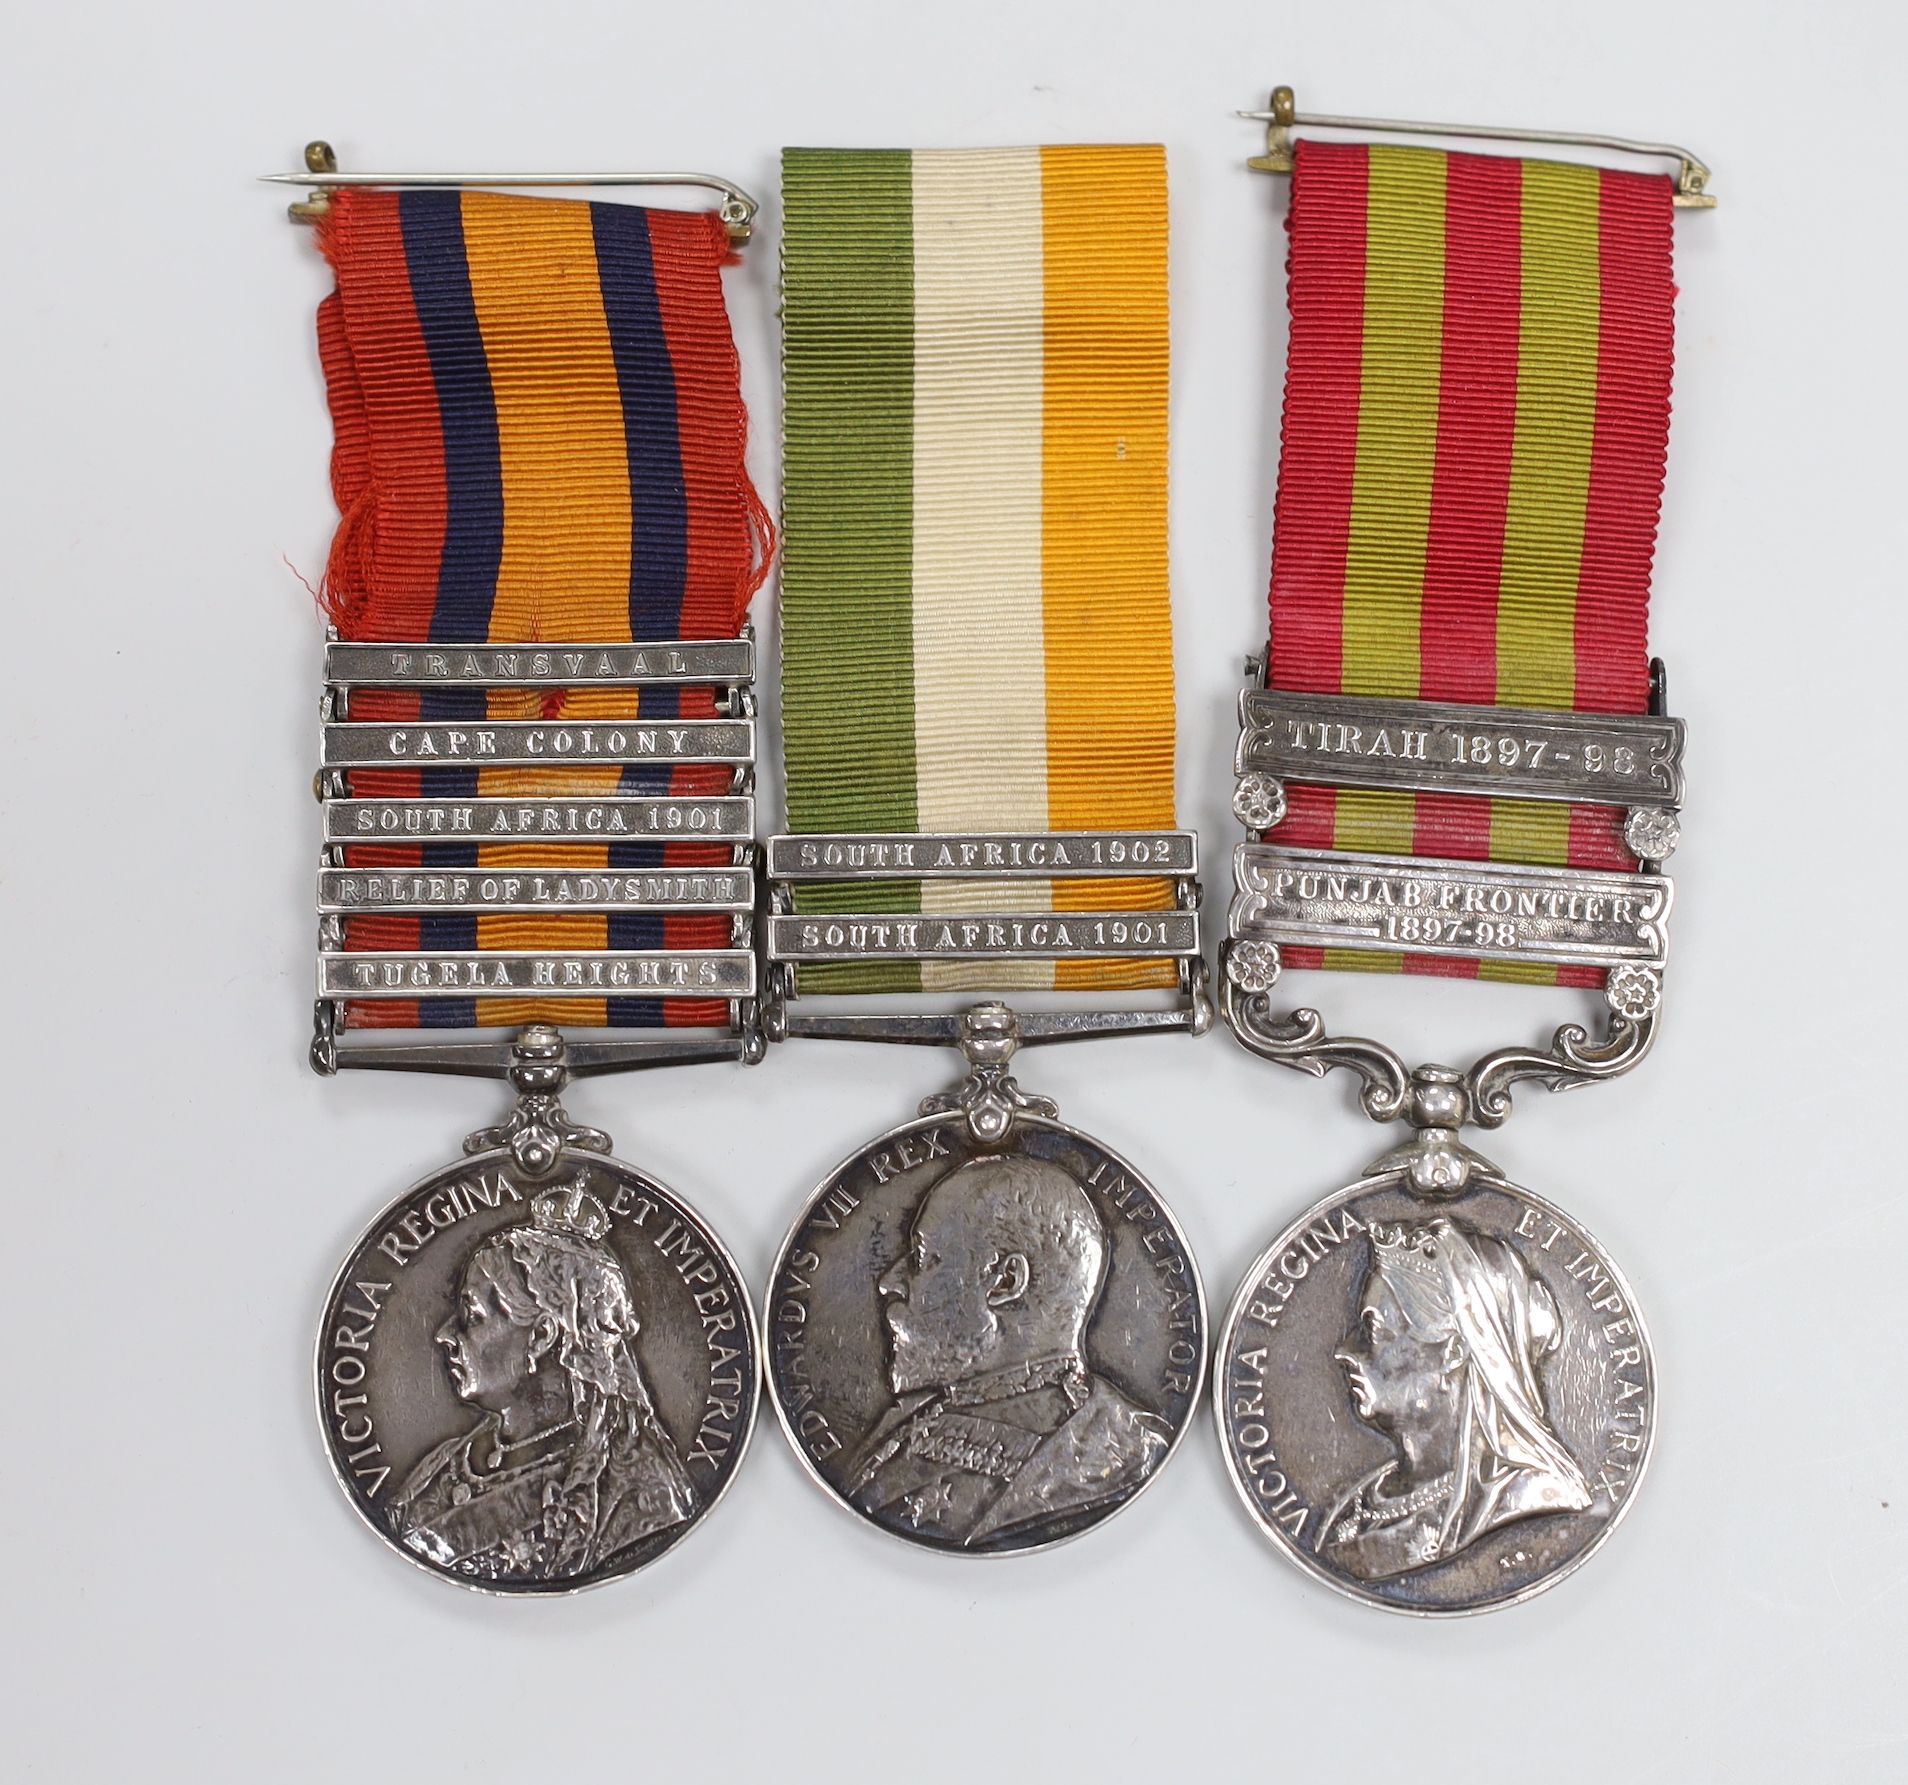 Victoria and Edward VII military medals to: 2733 PTE. F. NORGATE DEVON REGT. including IGSM with Tirah and Punjab frontier clasps, QSA with Transvaal, Cape Colony, South Africa 1901, Relief of Ladysmith and Tugela Height